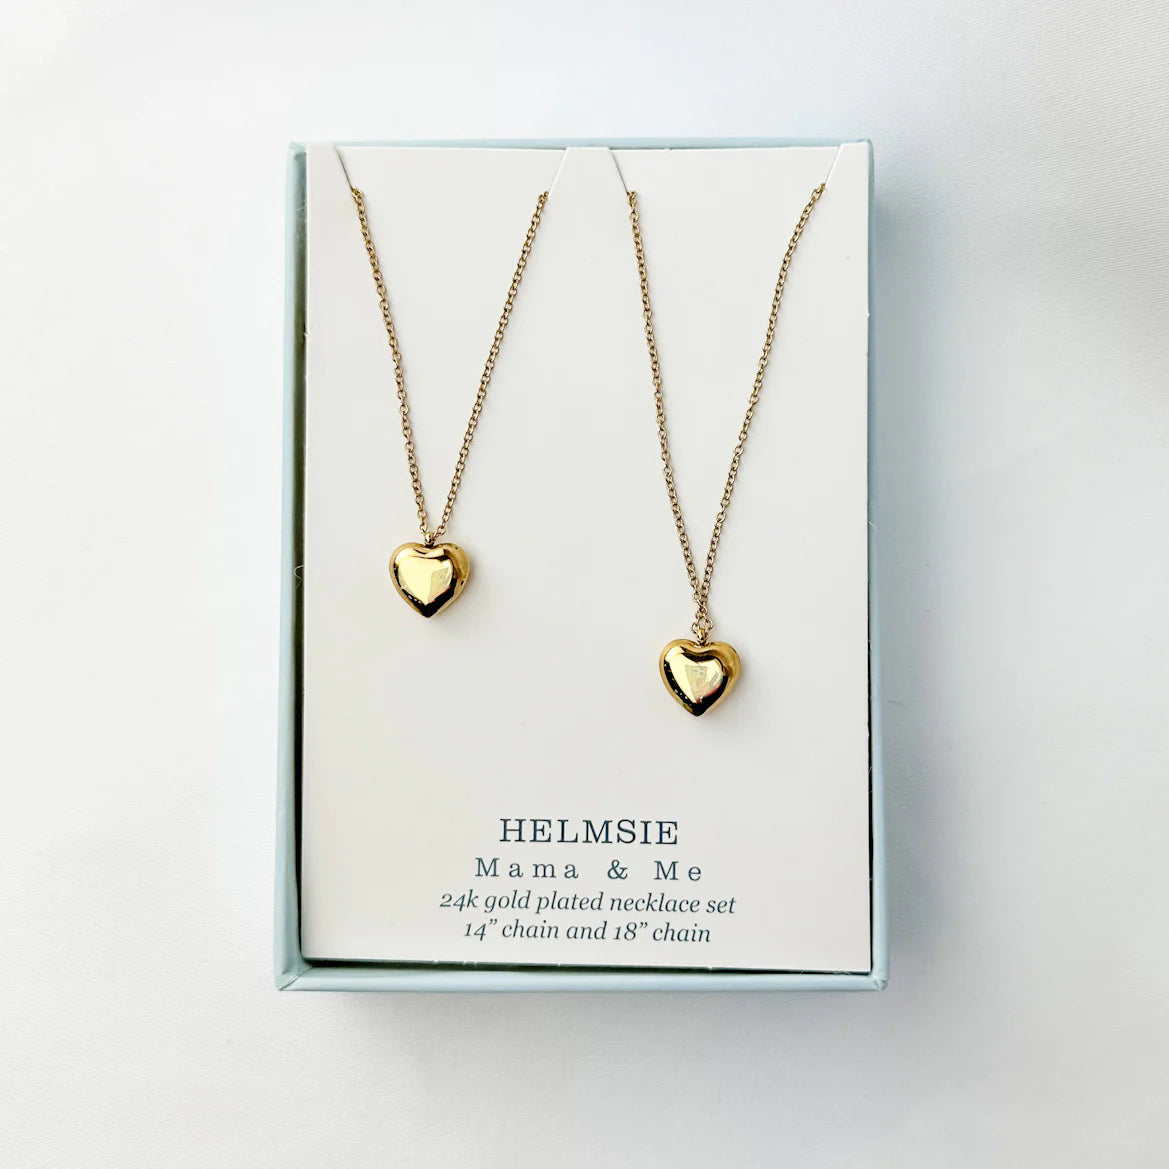 Helmsie Mama & Me Puff Heart Necklace Set